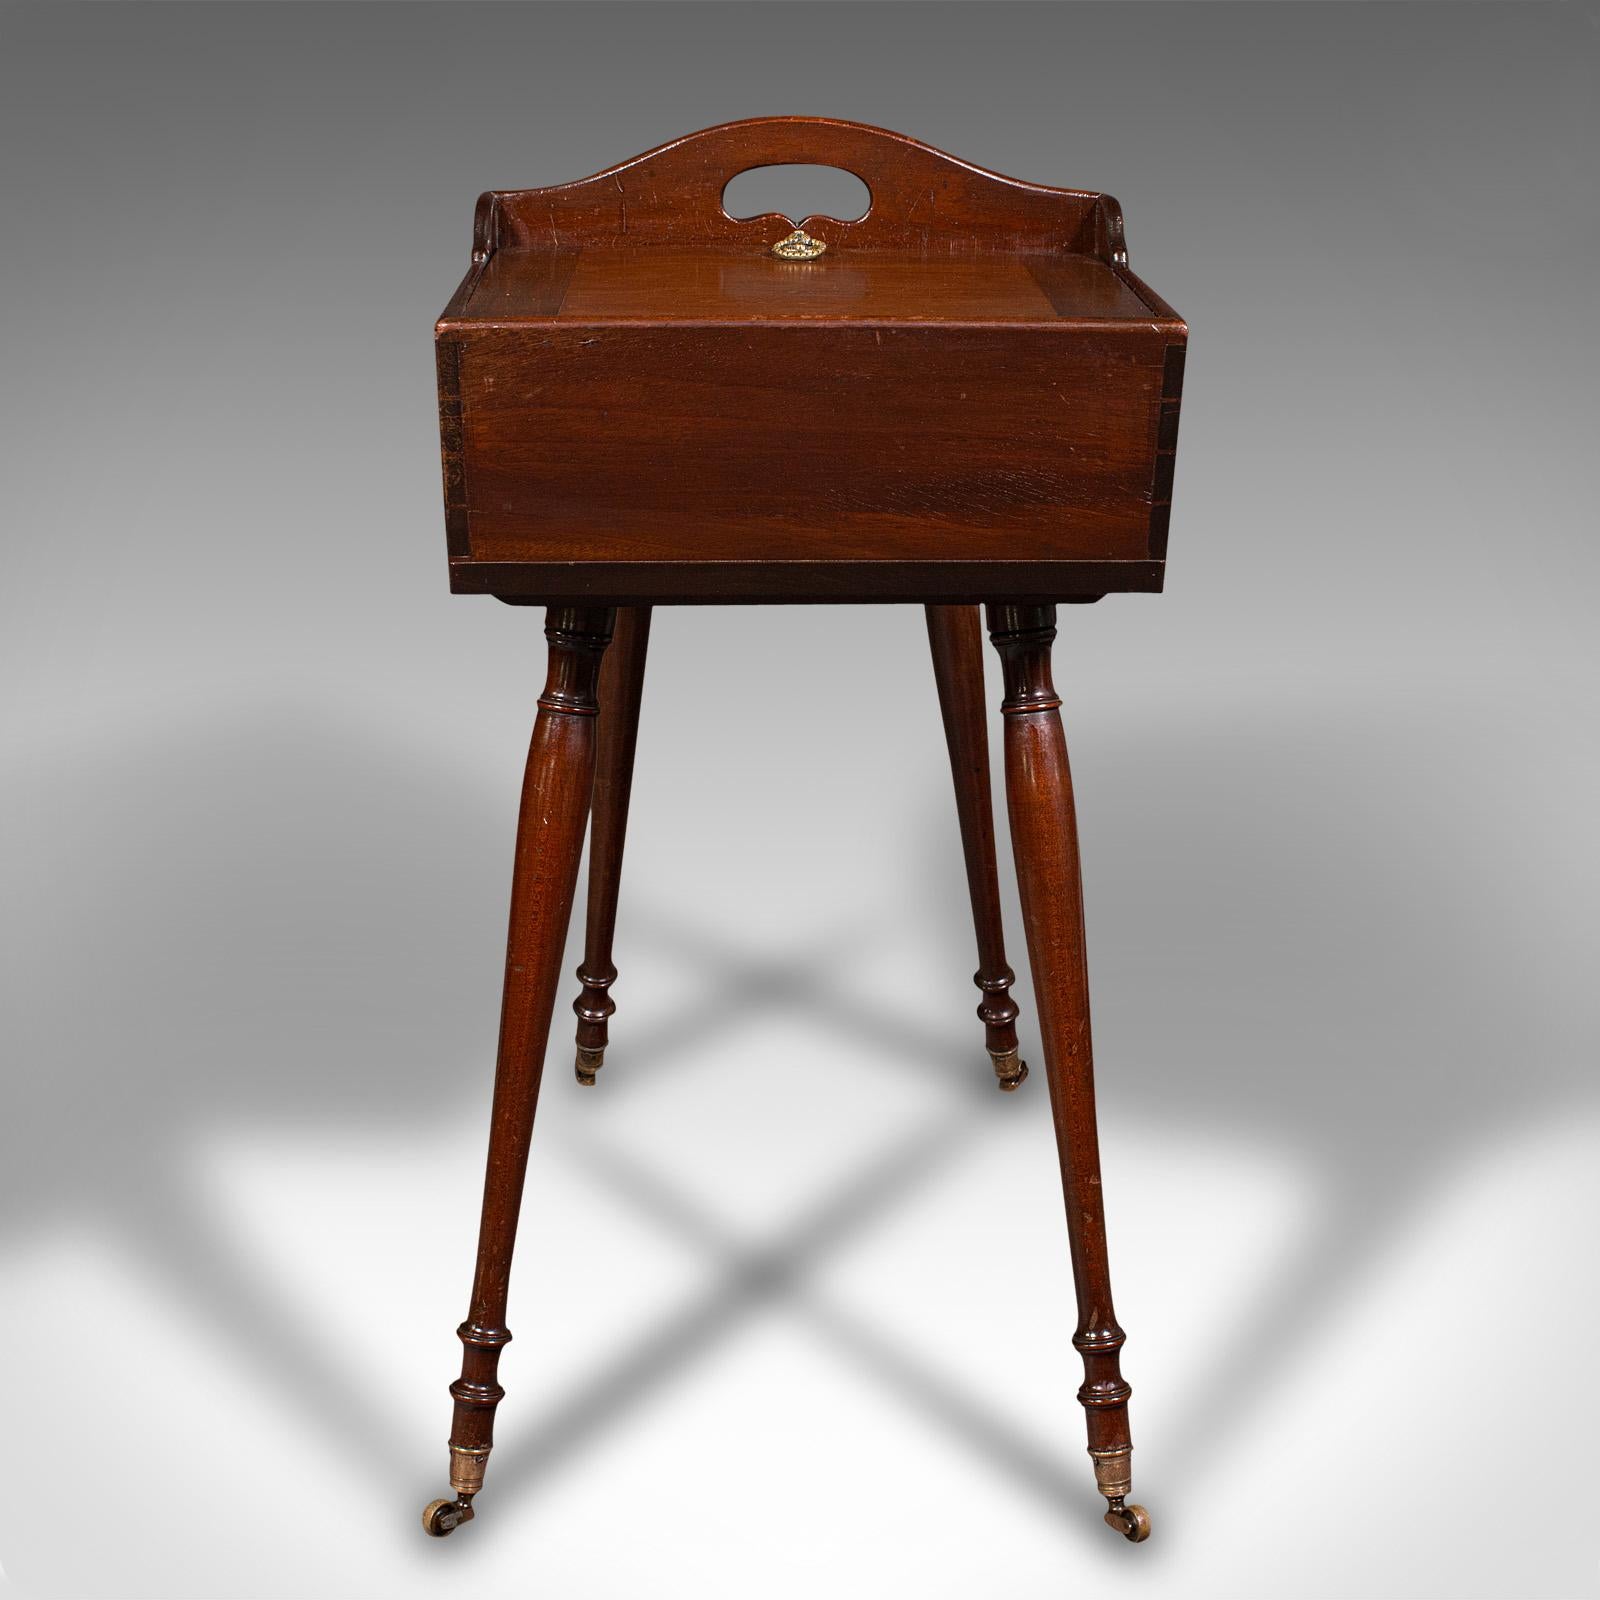 Antique Butler's Silver Valet Stand, English, Walnut, Work Box, Victorian, 1880 For Sale 2